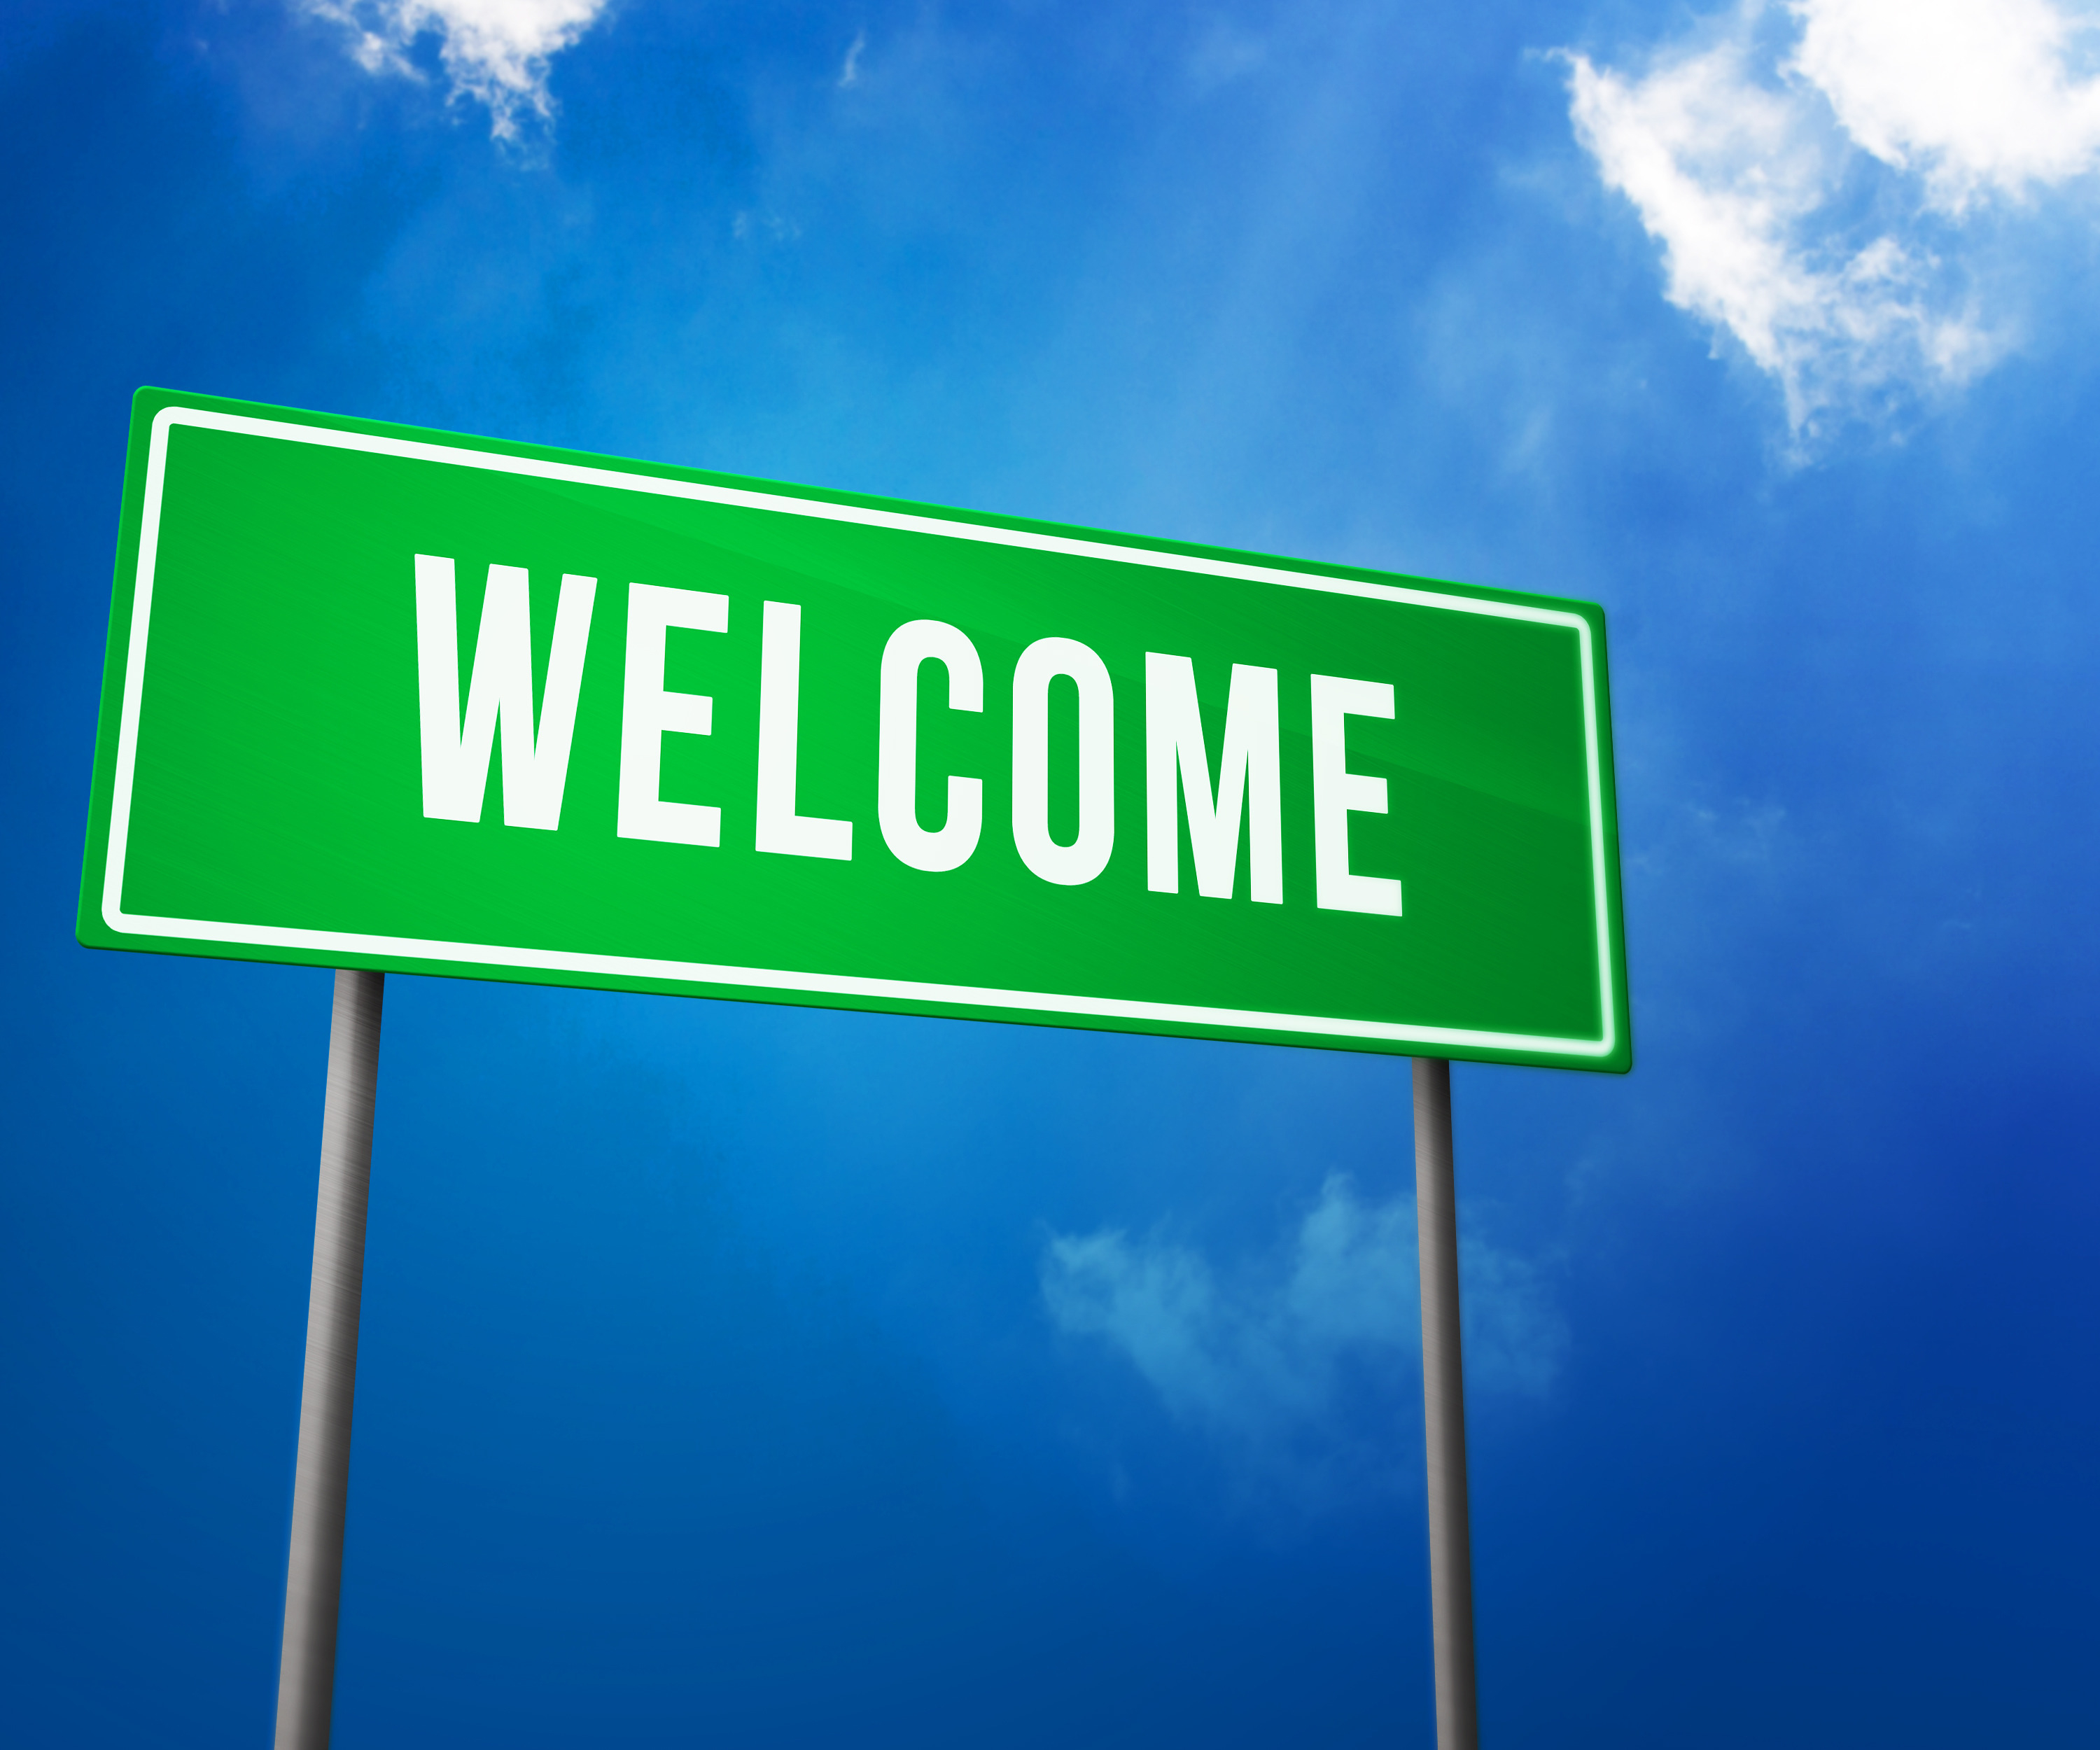 welcome-on-green-road-sign_fJKH5t5d.jpg